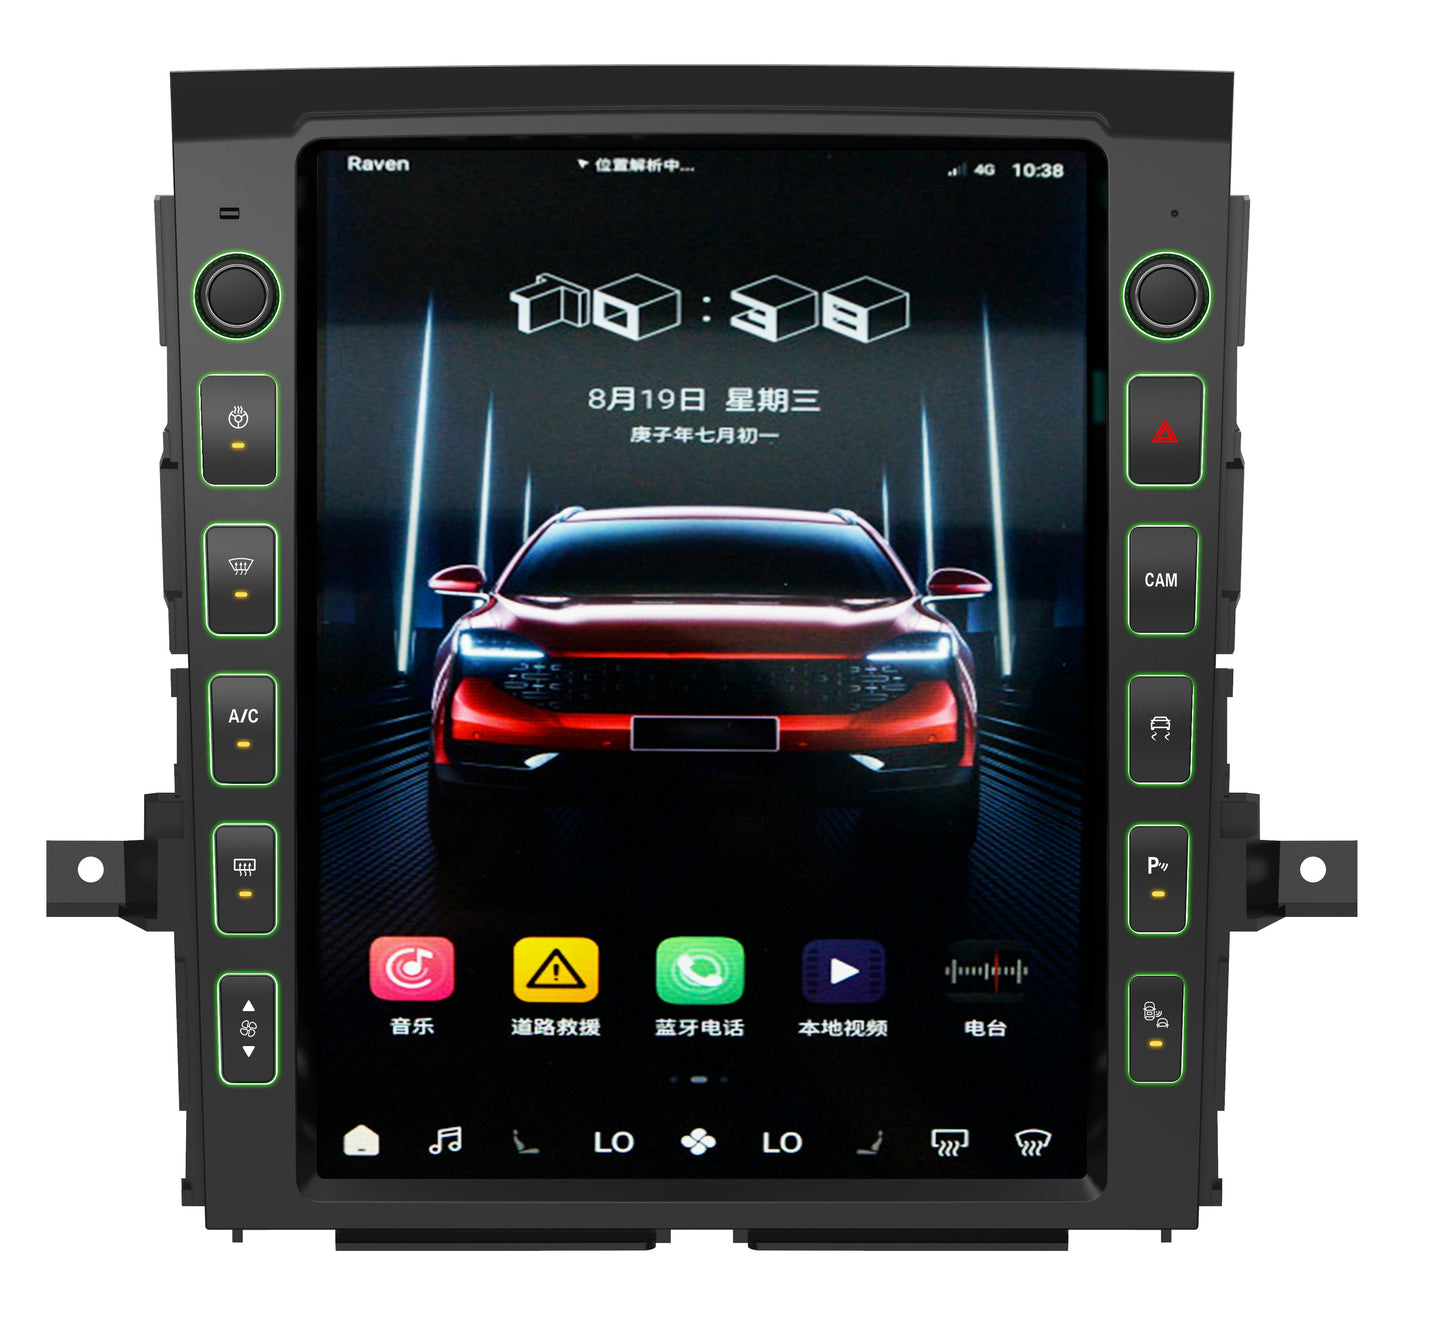 13” Android 9 / 10 Vertical Screen Navigation Radio for Nissan Titan (XD) 2016 - 2019